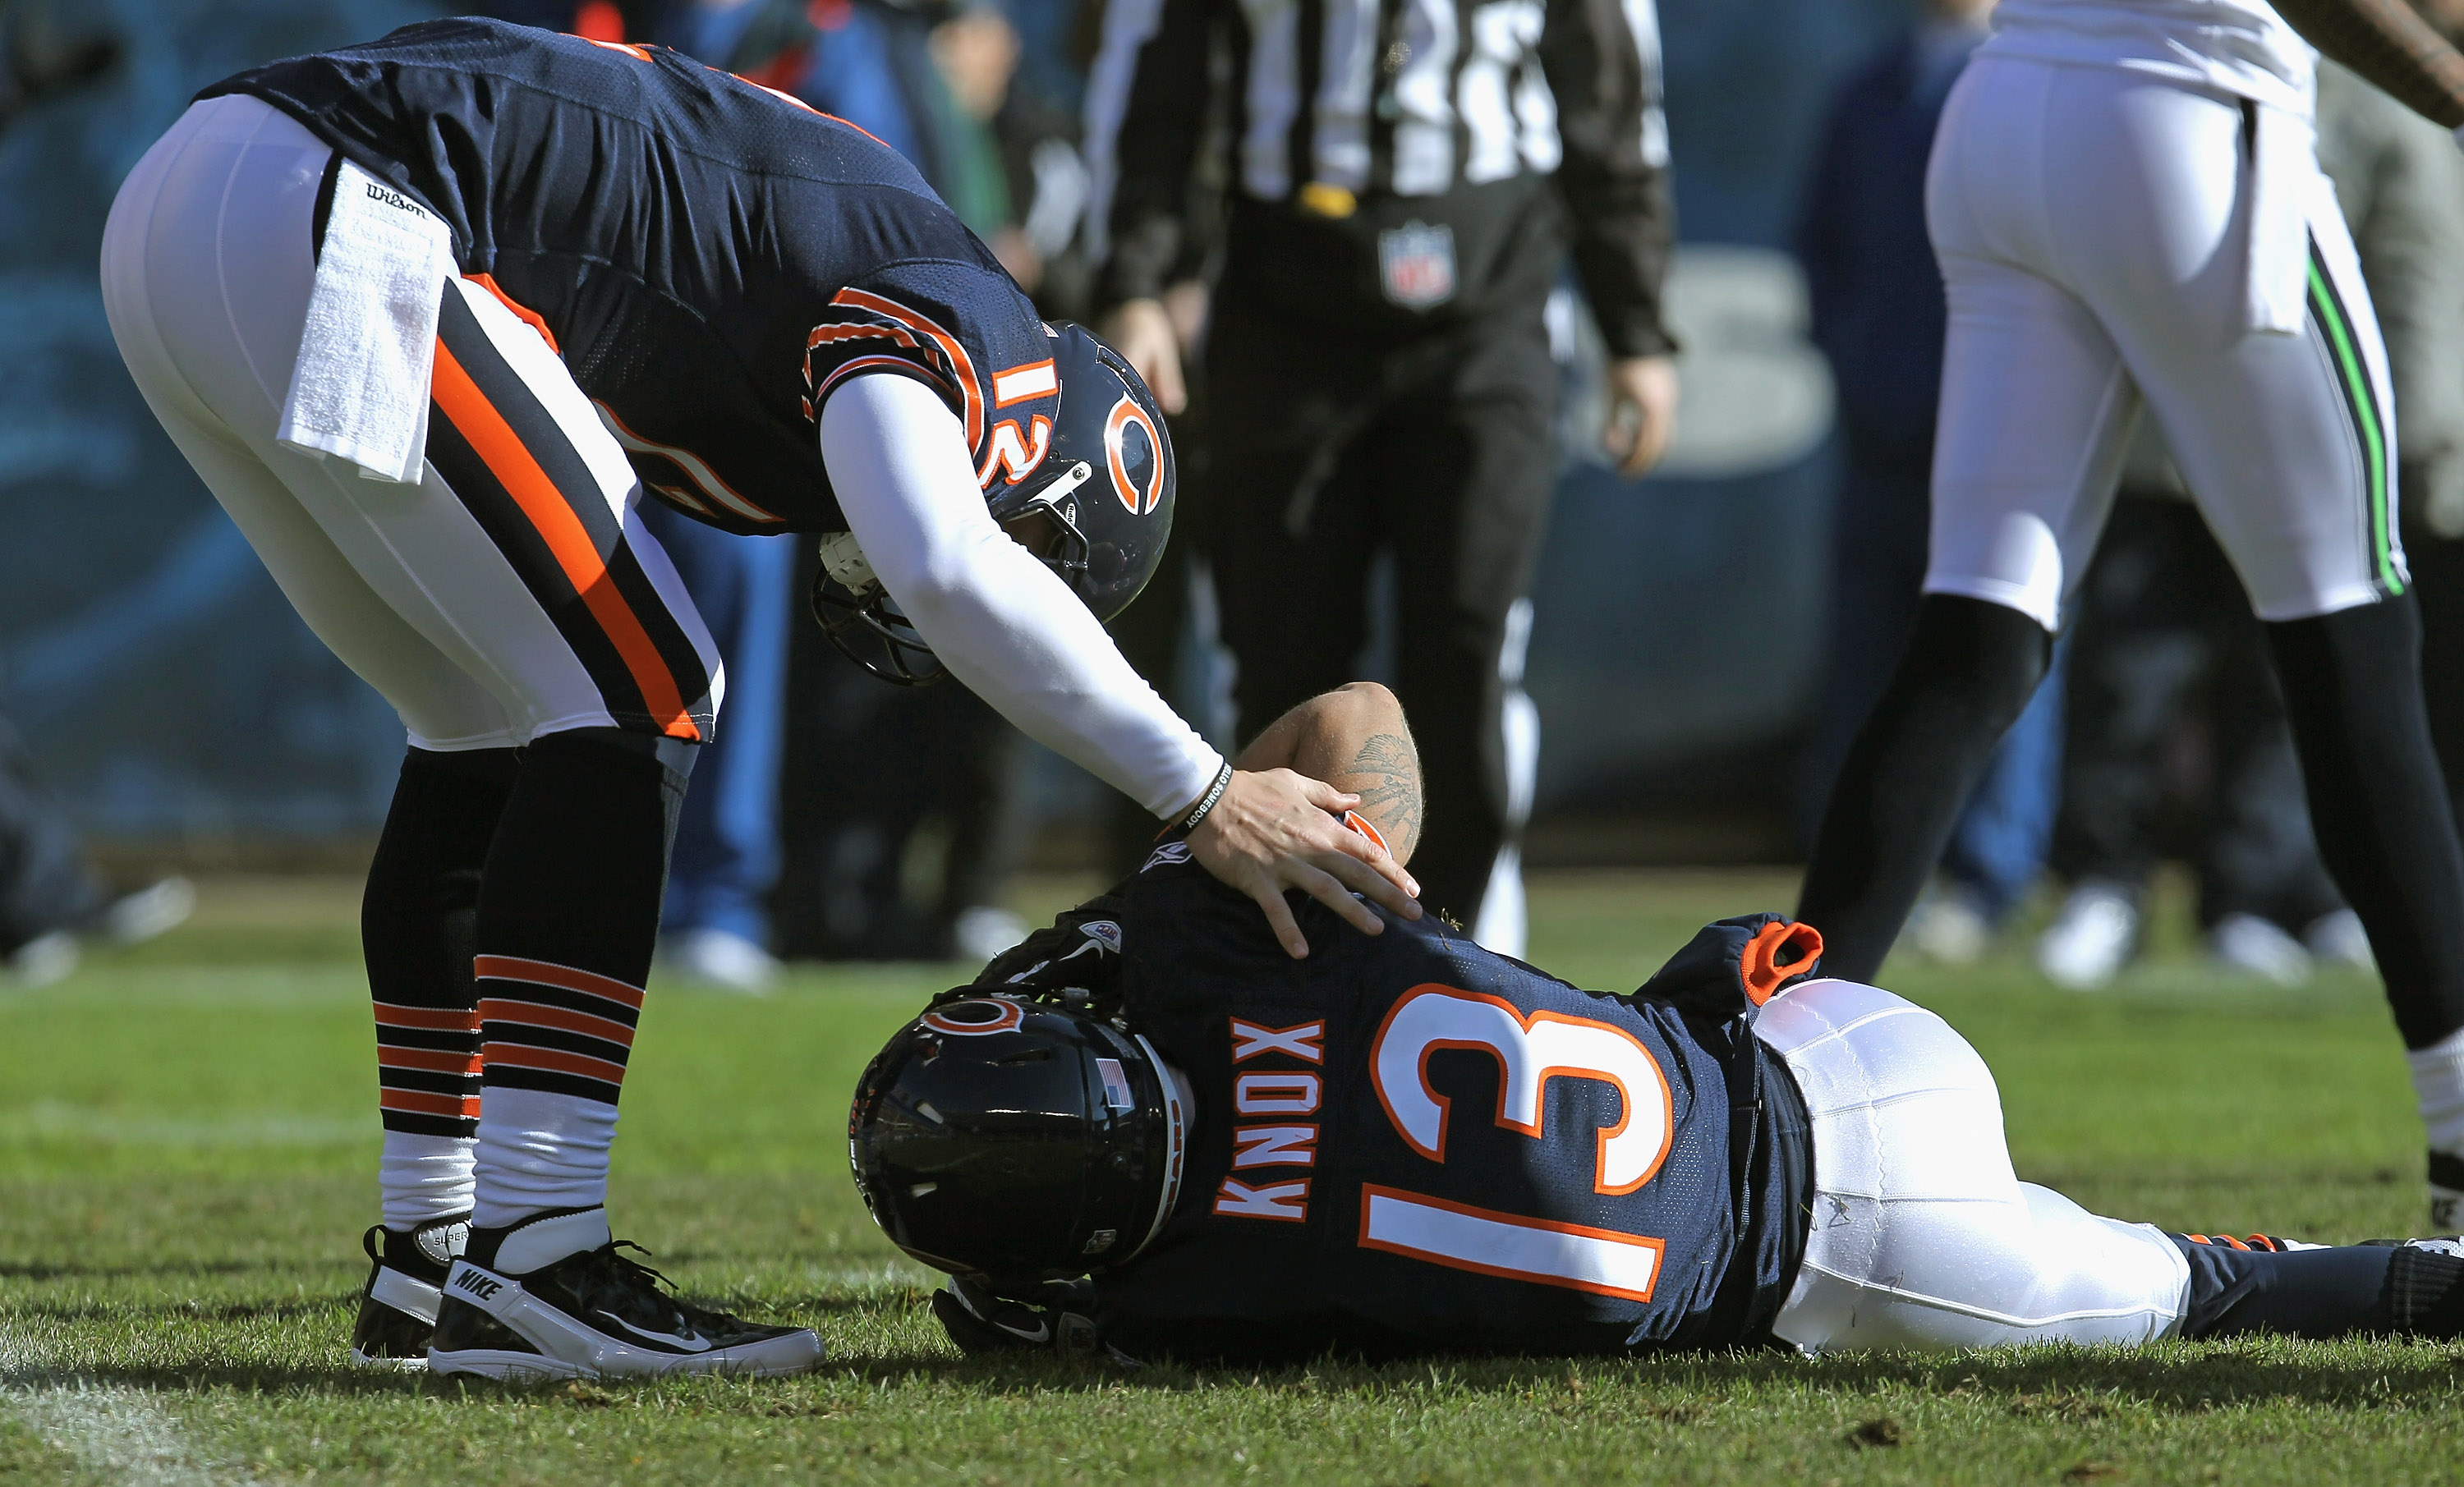 Bears player Johnny Knox lays on the field injured